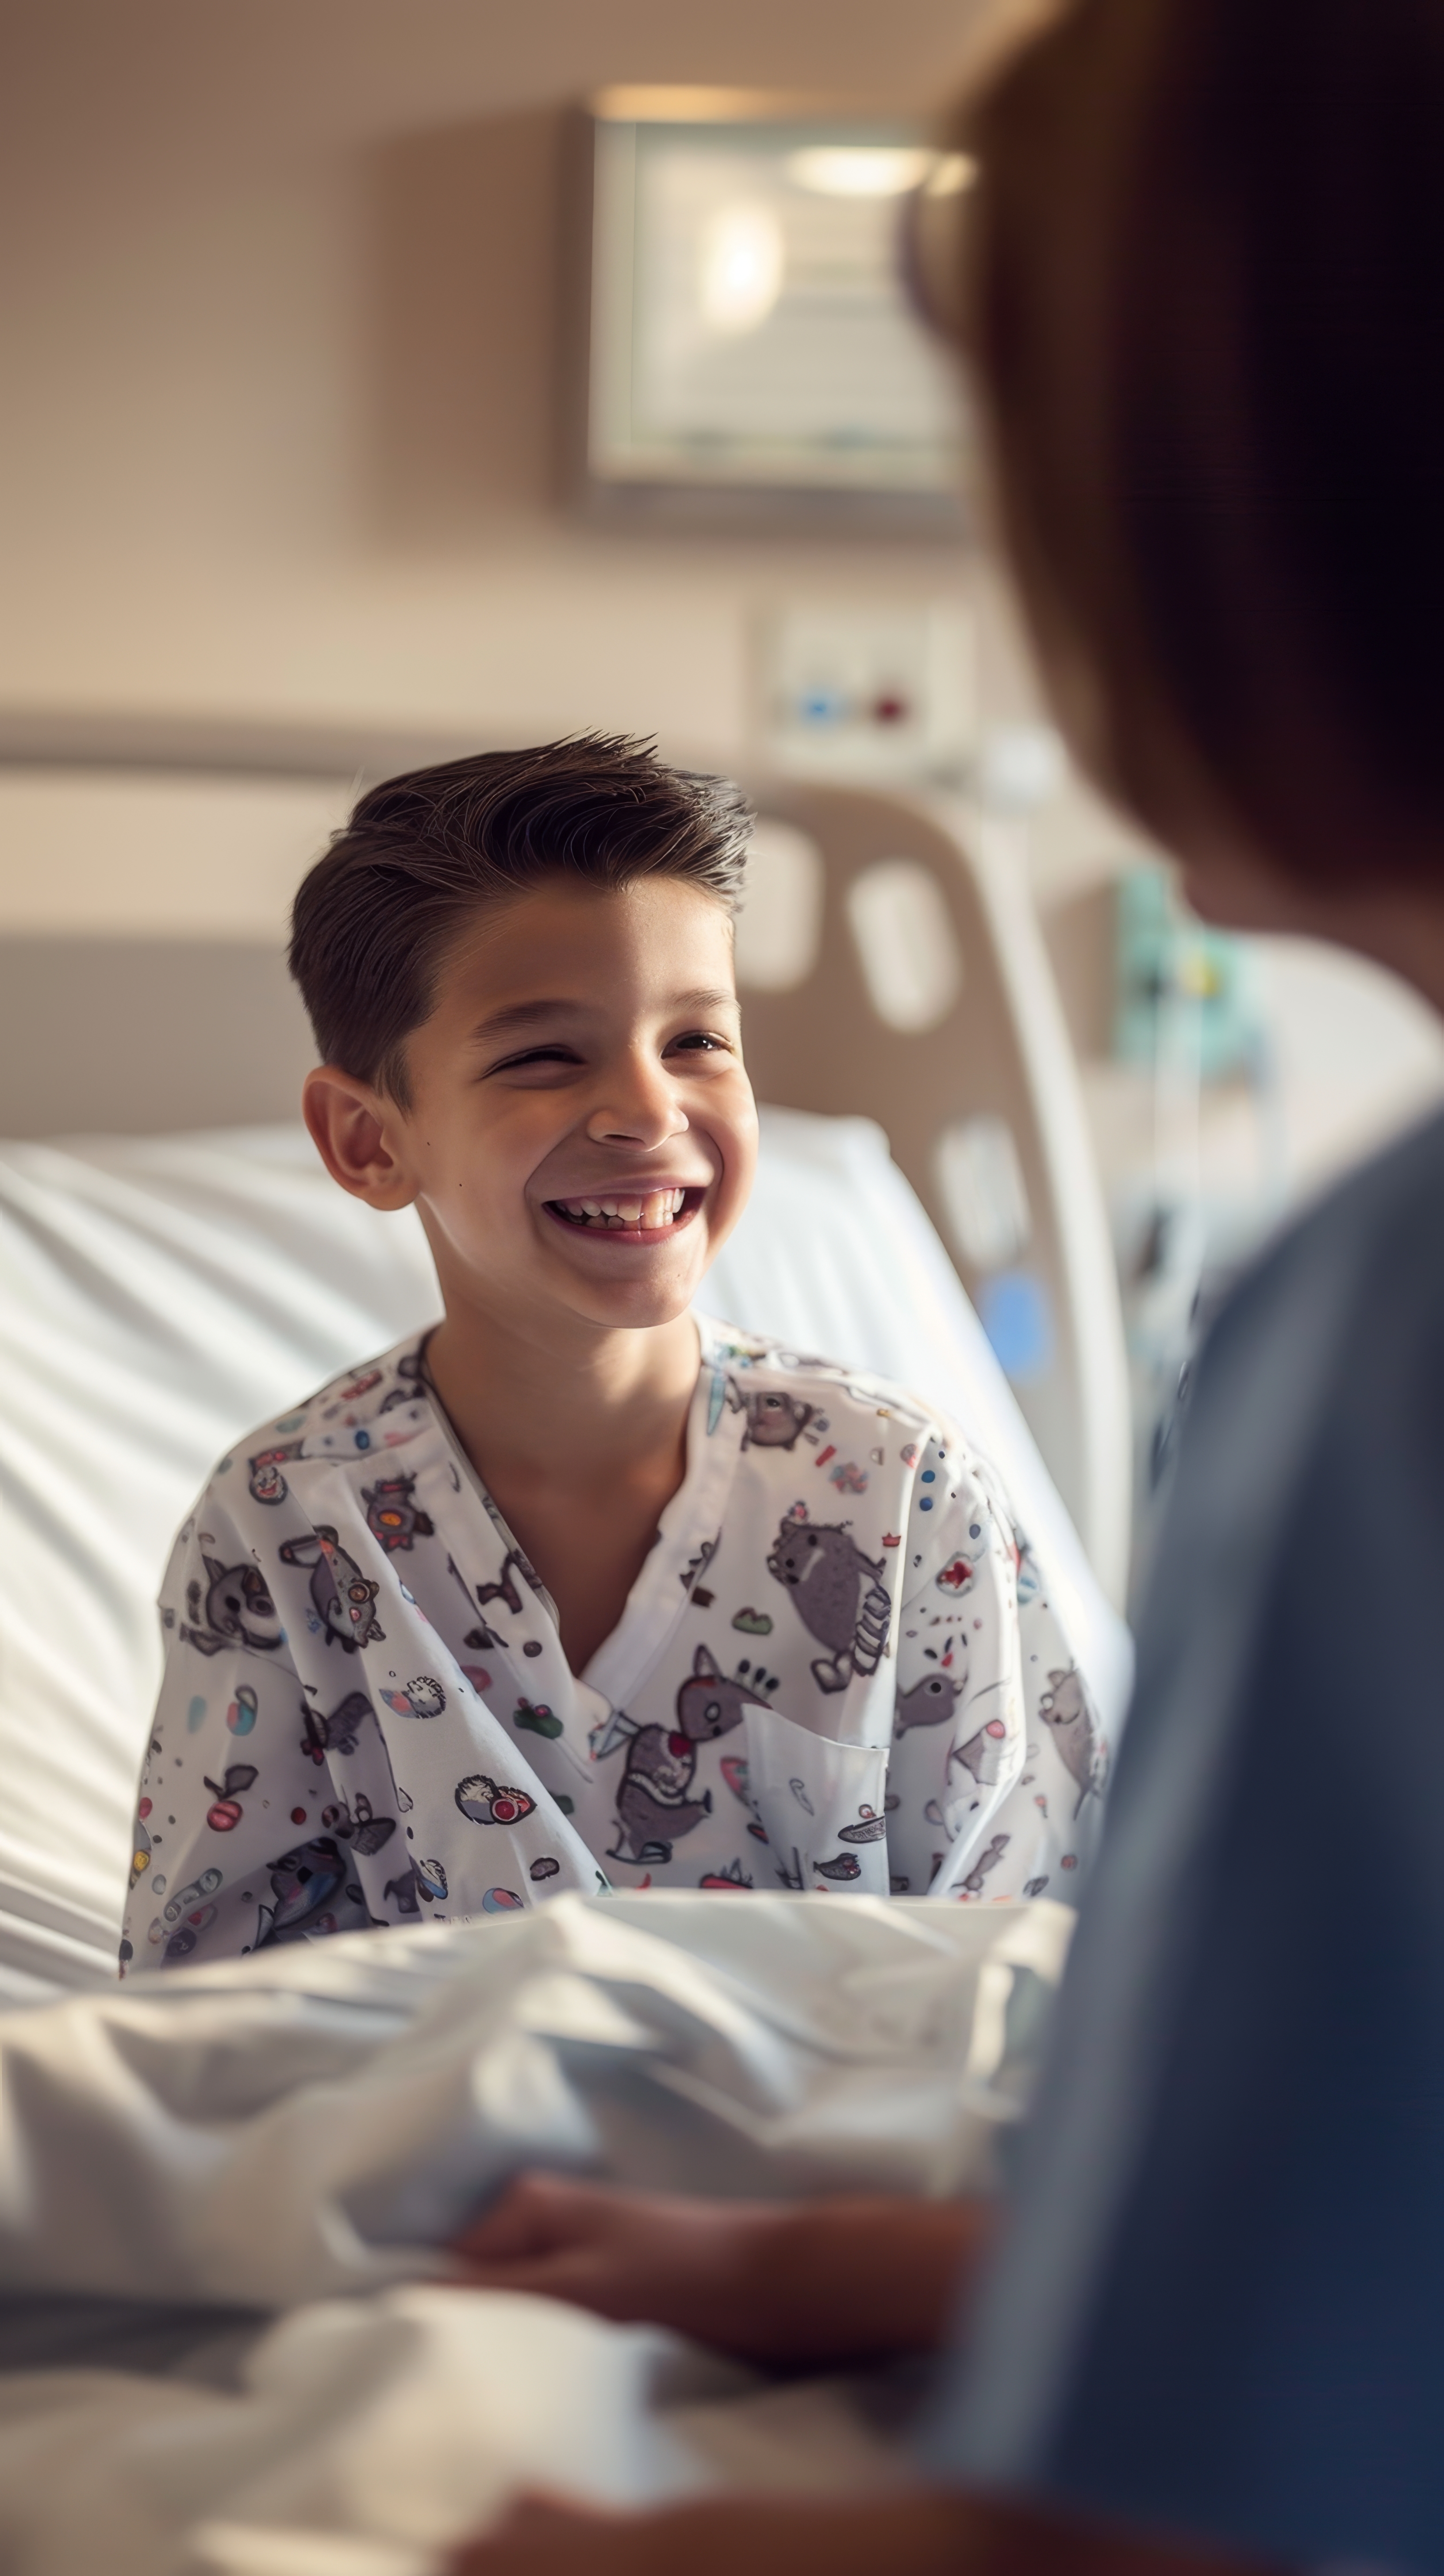 young-boy-hospital-bed-shares-cheerful-conversation-his-youthful-spirit-evident-his-bright-smile-sparkling-eyes